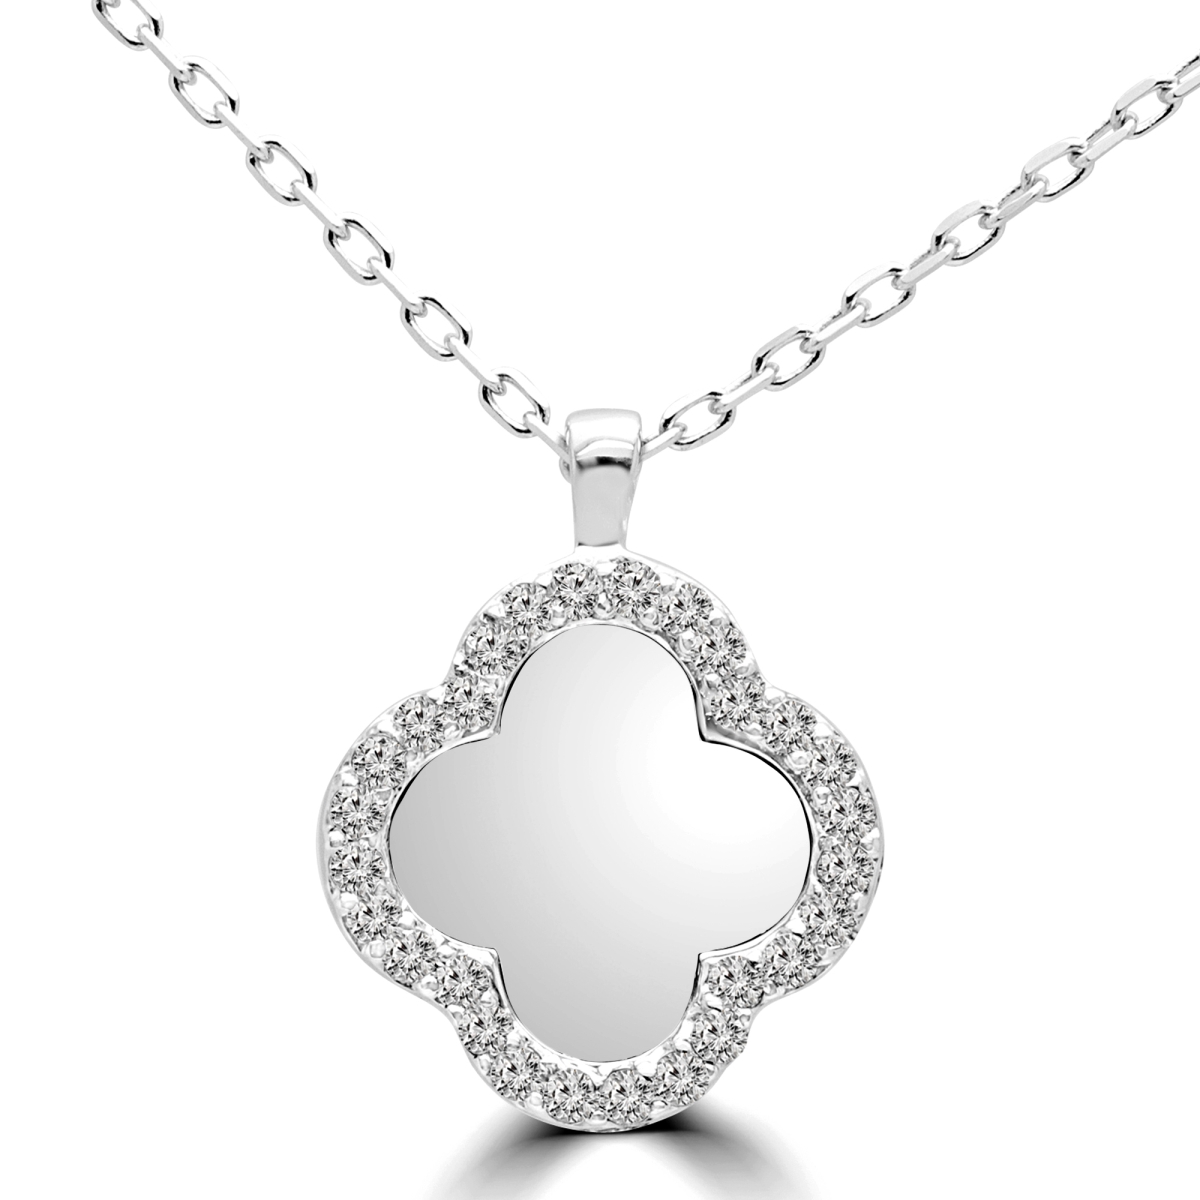 Mdr170160 0.1 Ctw Round Diamond Fancy Pendant Necklace In 14k